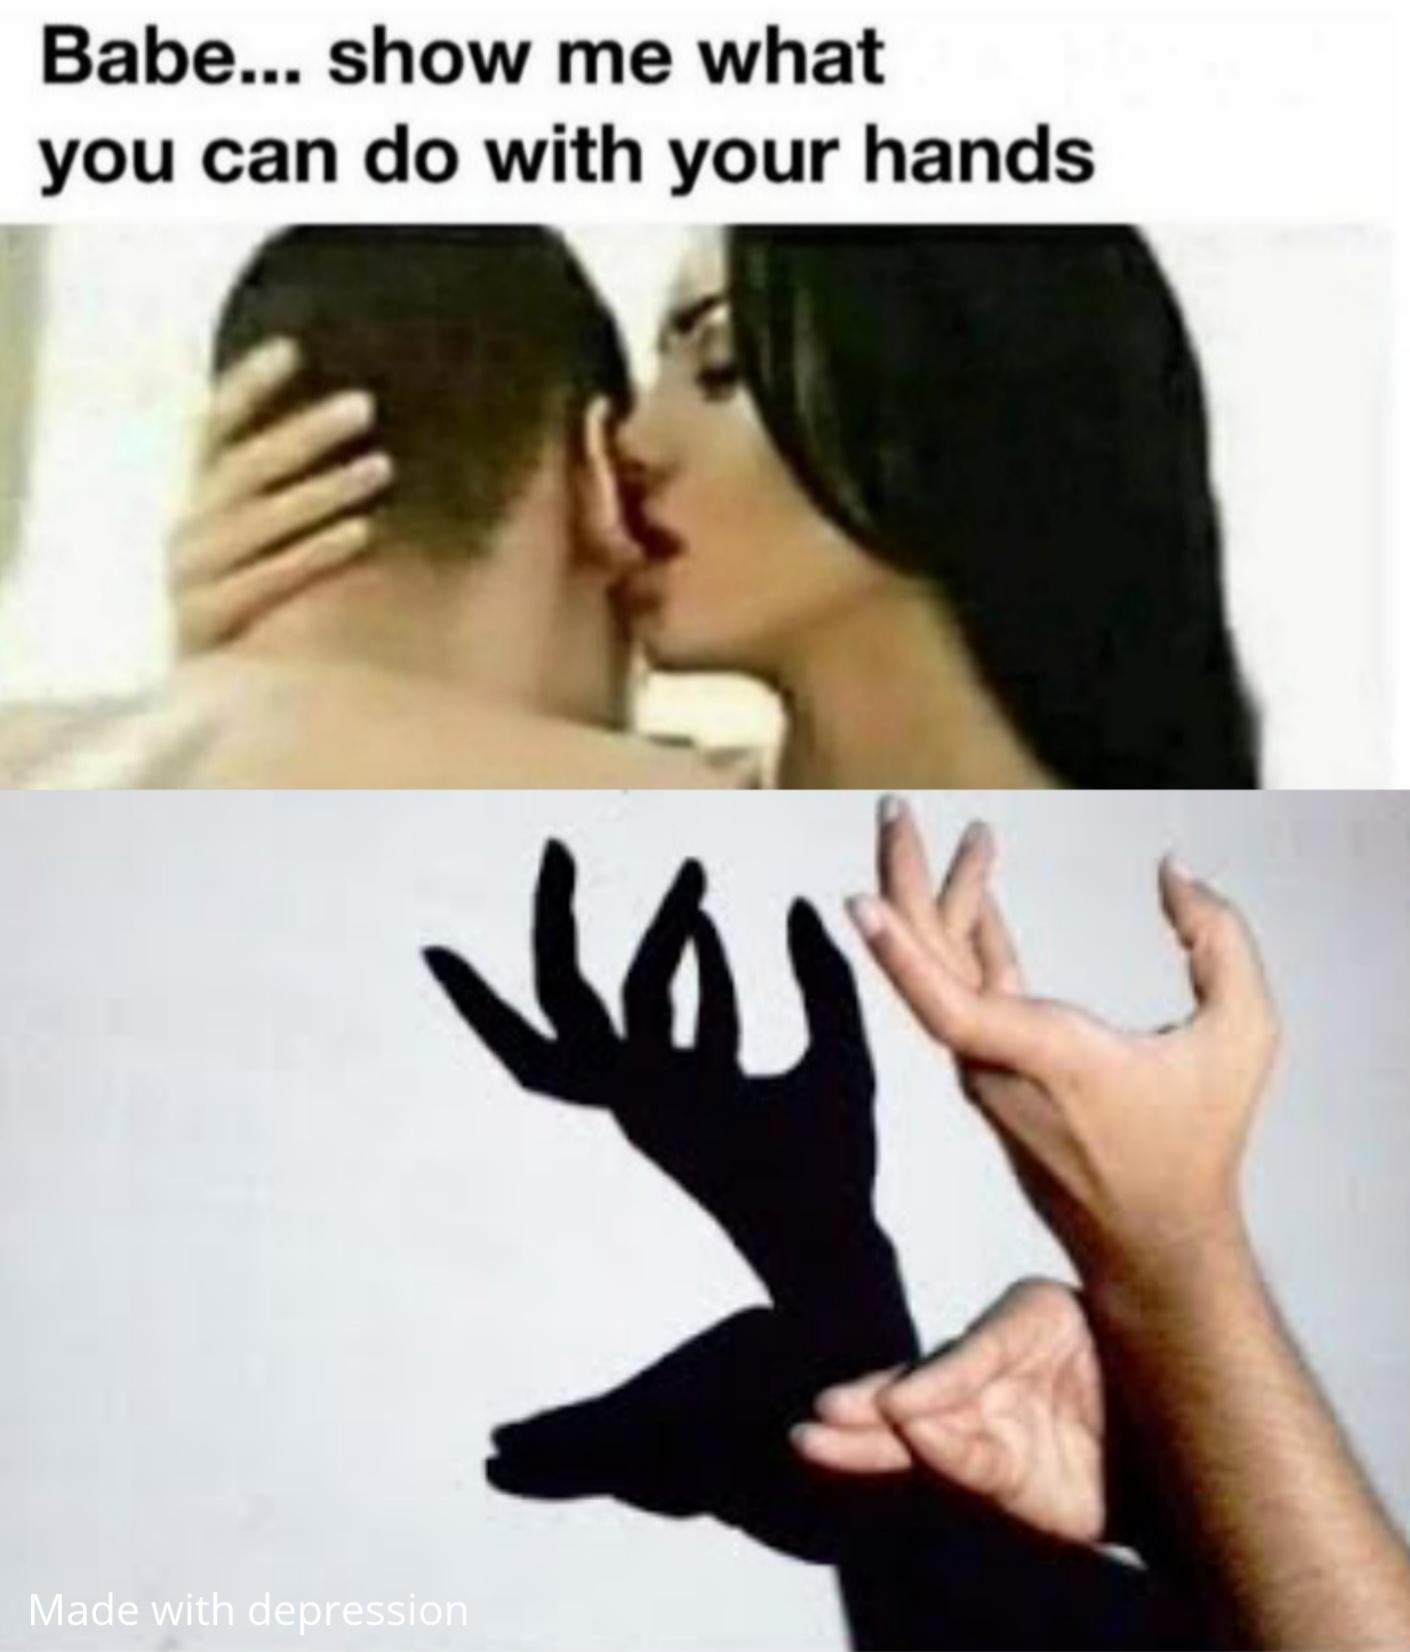 Show me what you can do with your hands